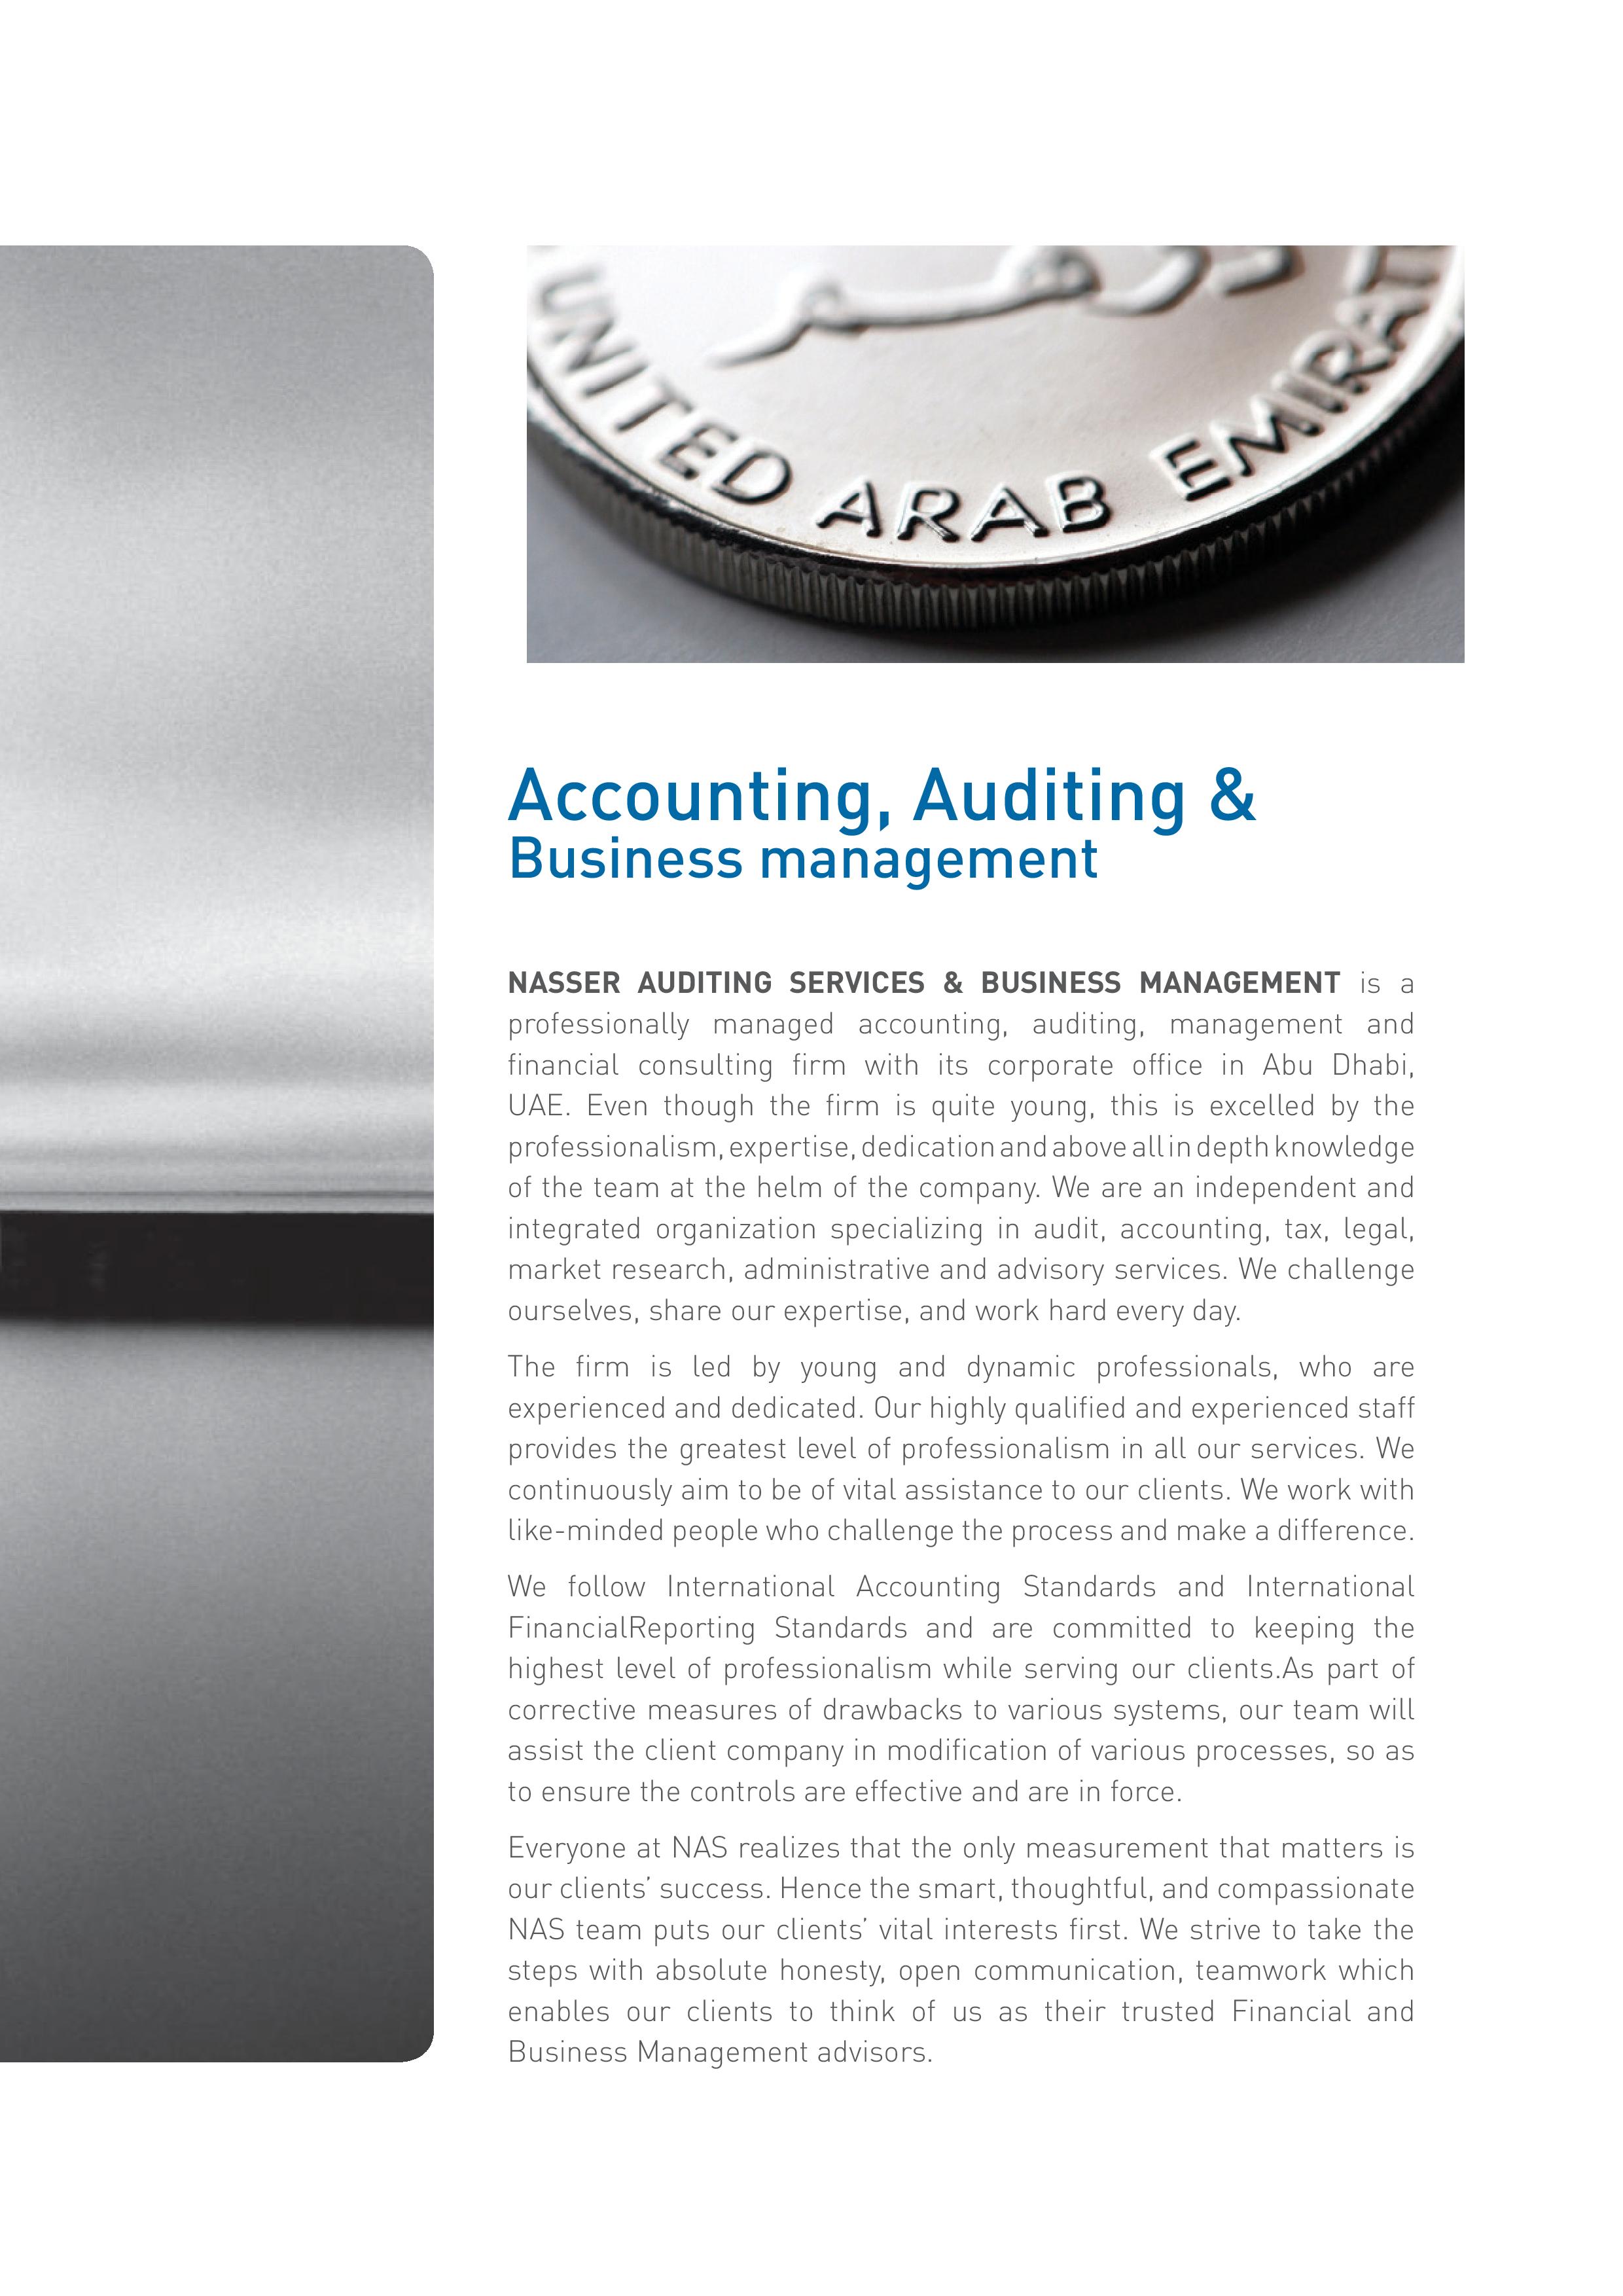 NASSER AUDITING SERVICES & BUSINESS MANAGEMENT is a leading professionally managed accounting, audit...